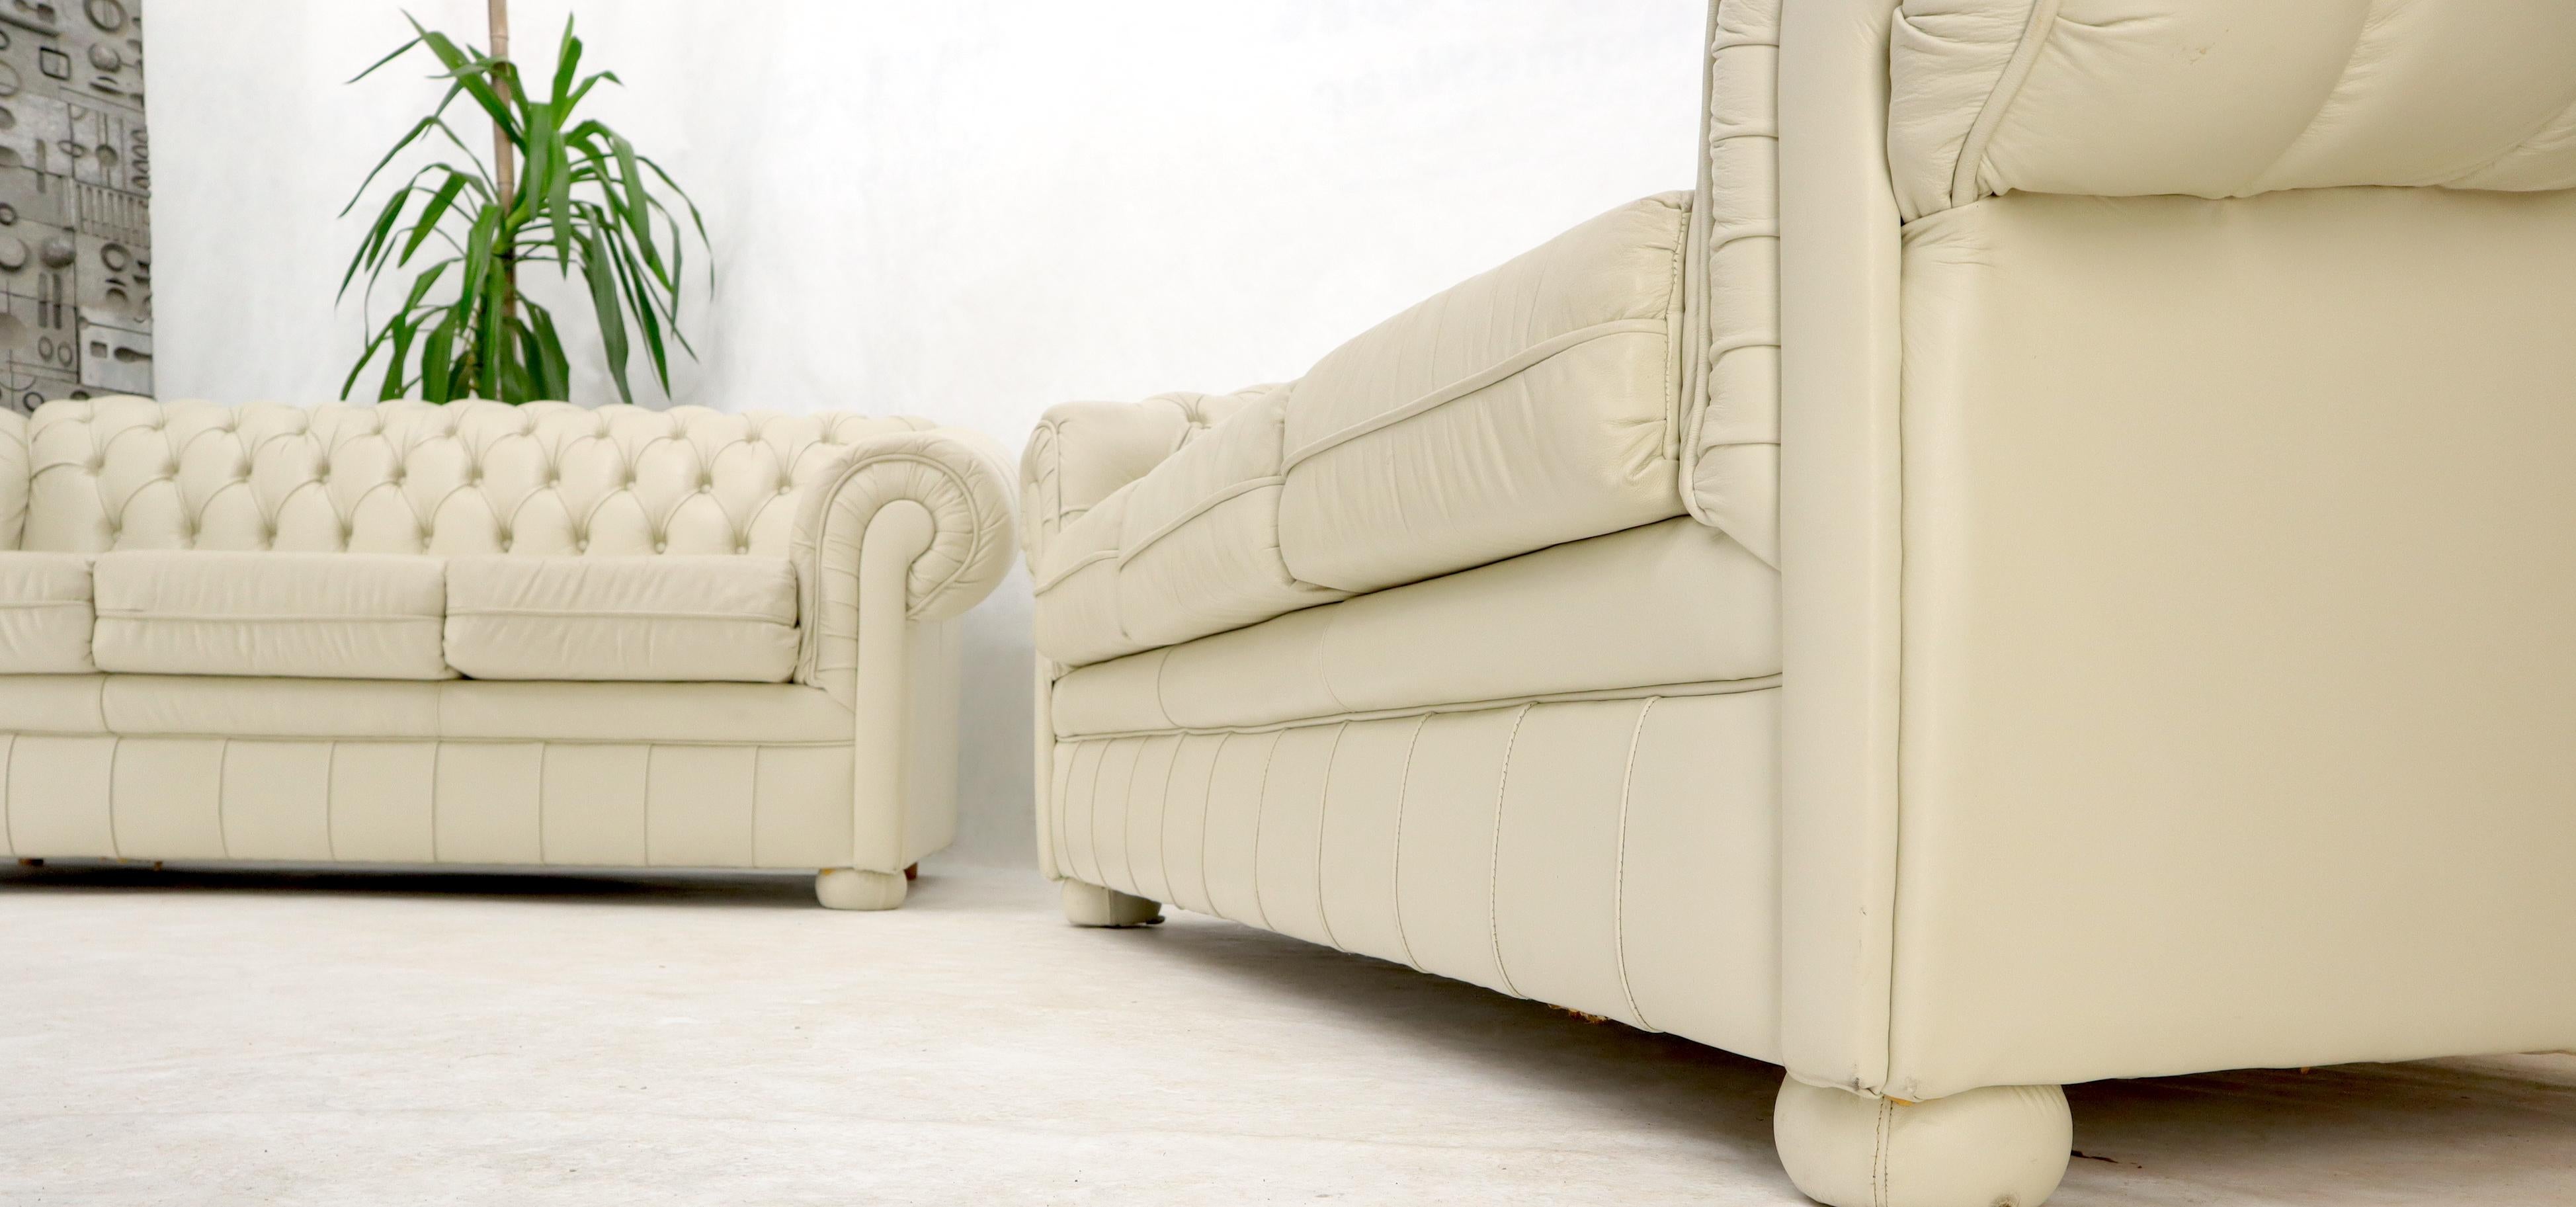 Pair of Off-White Leather Upholstery Tufted Chesterfield Sofas Couches 4